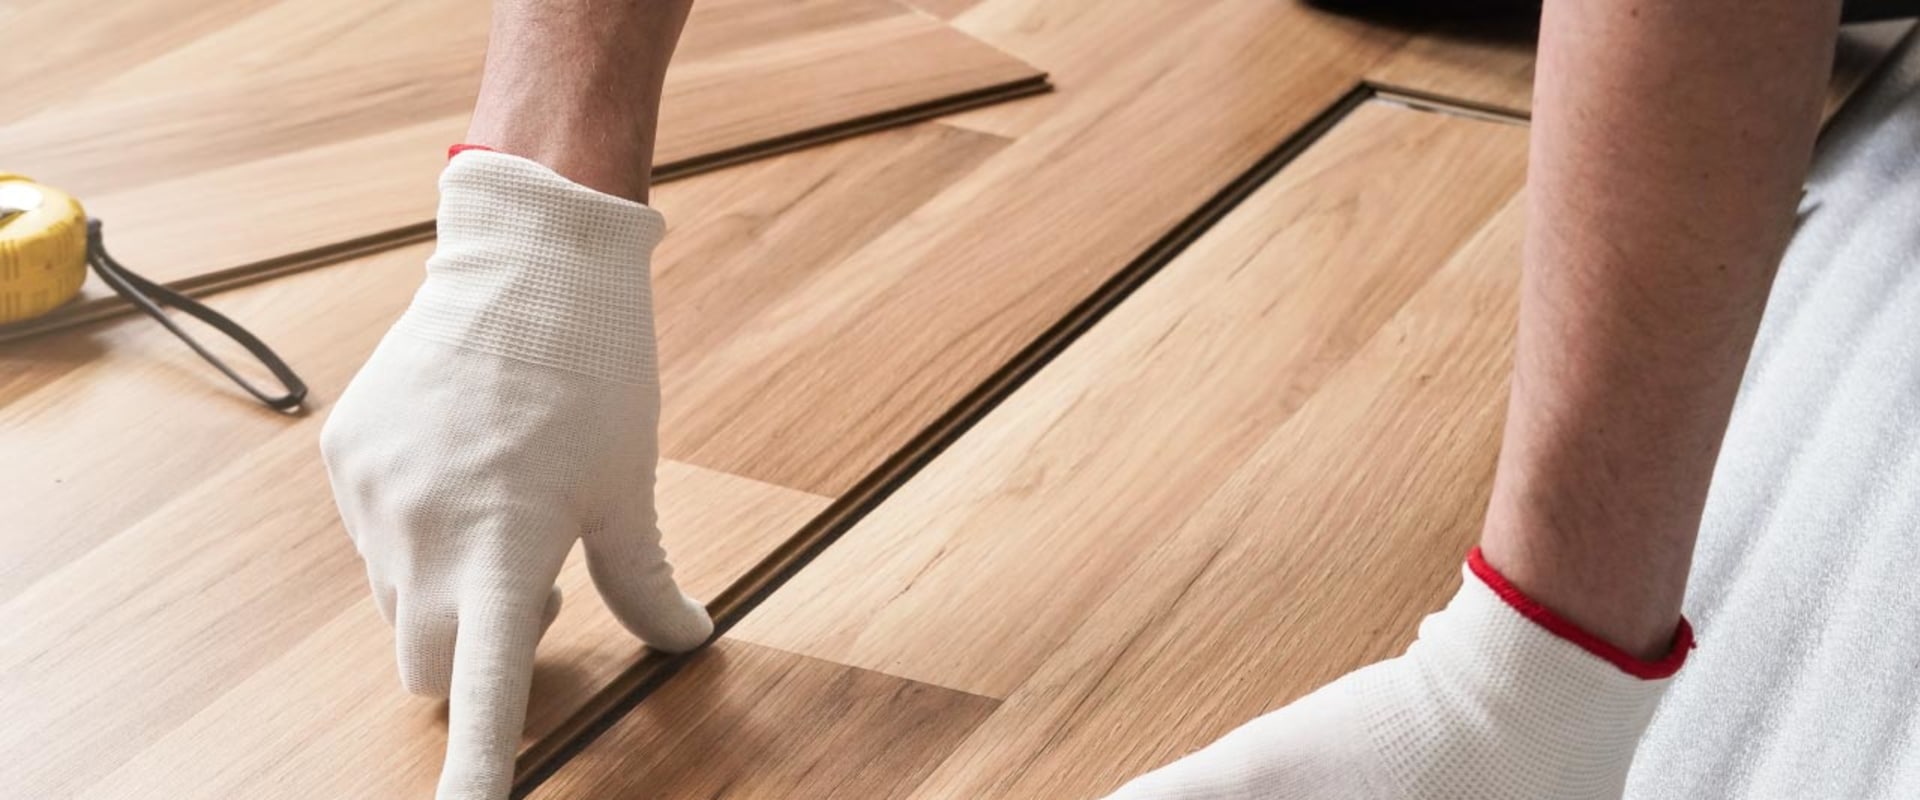 How long does it take to install 1500 square feet of hardwood floors?